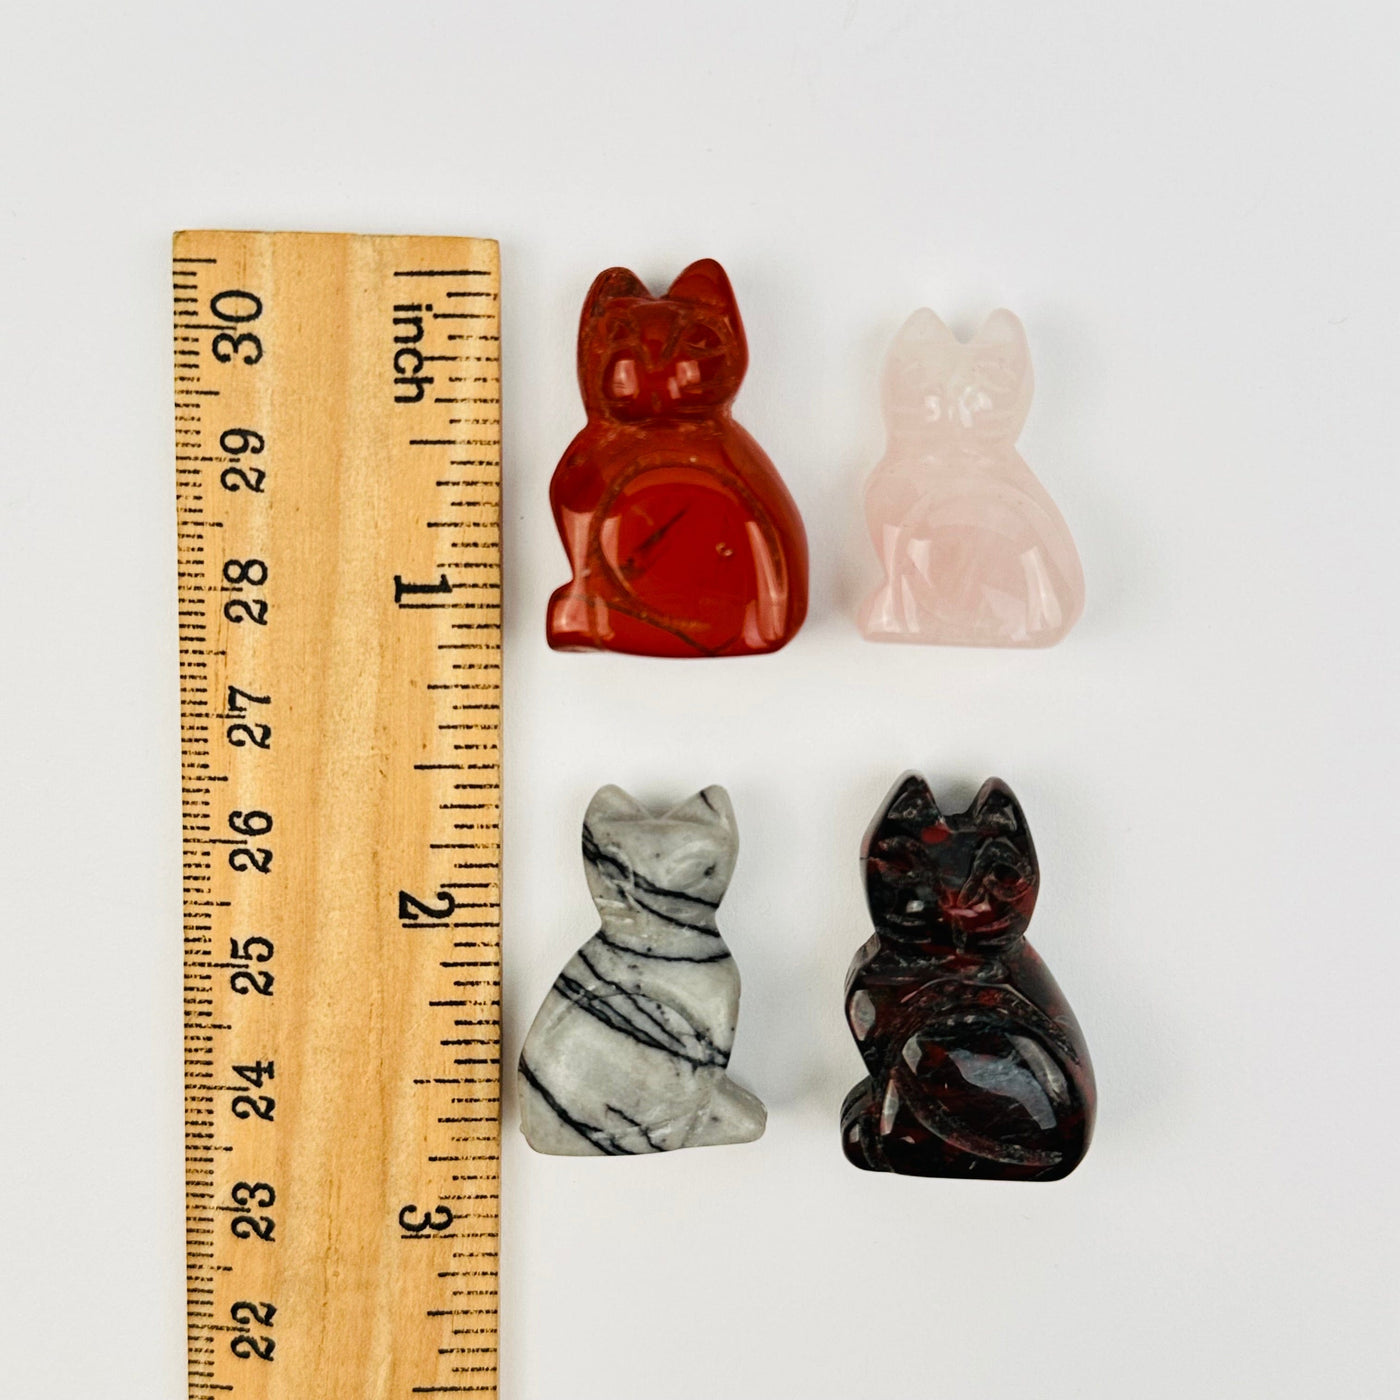 gemstone cats next to a ruler for size reference 